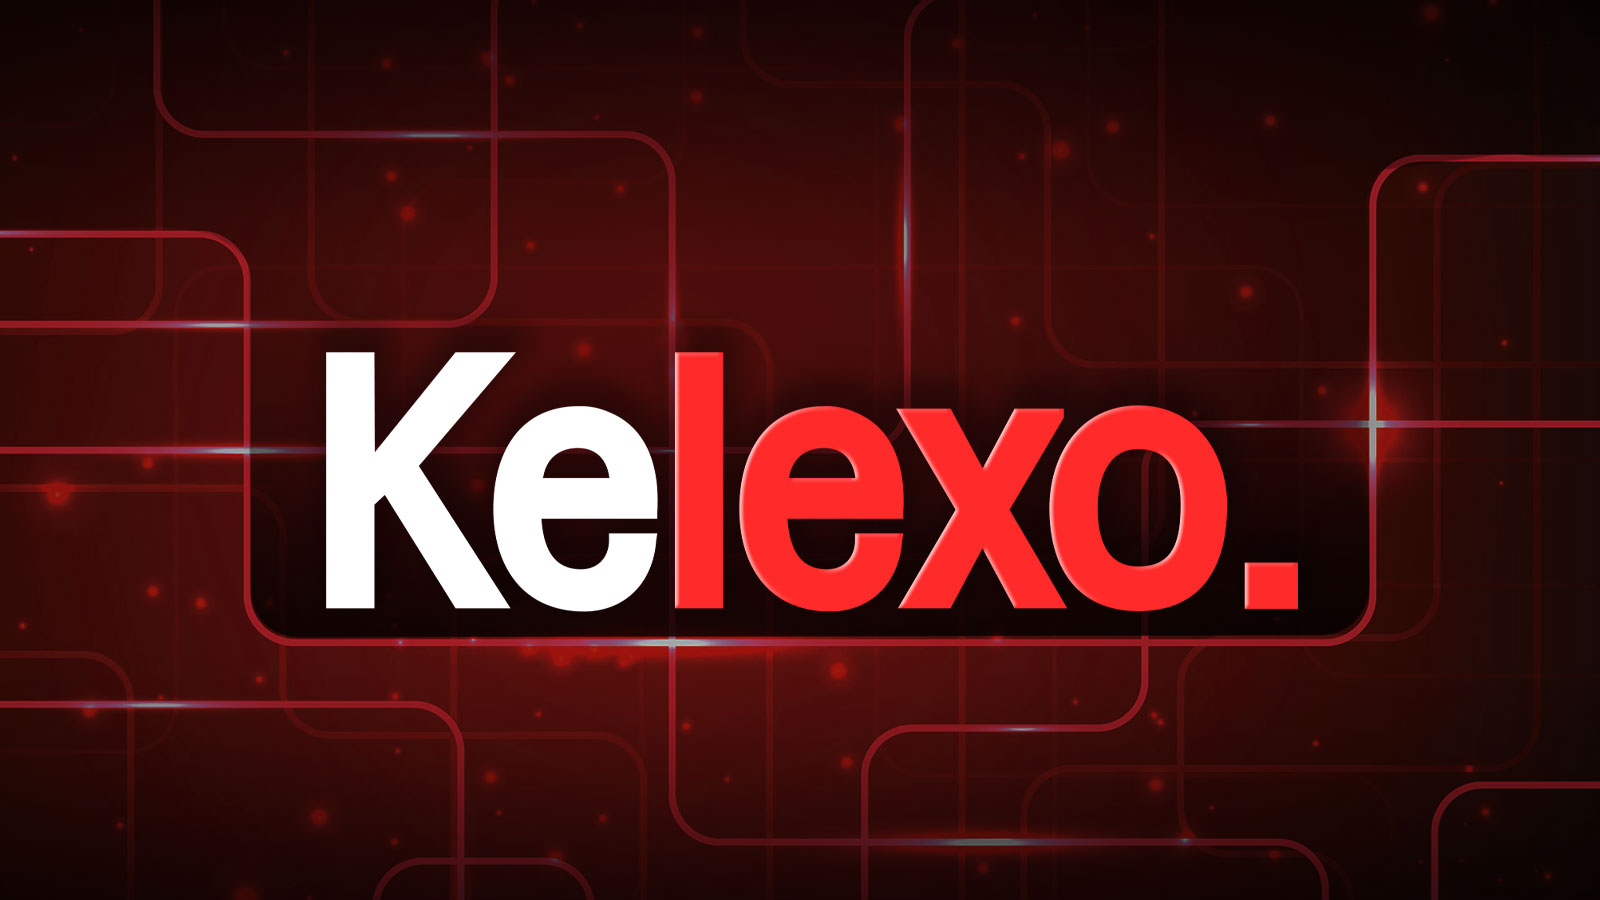 Kelexo (KLXO) Tokensale Campaign Increasingly Popular in February as Tron (TRX), Avalanche (AVAX) Altcoins Set Local Highs